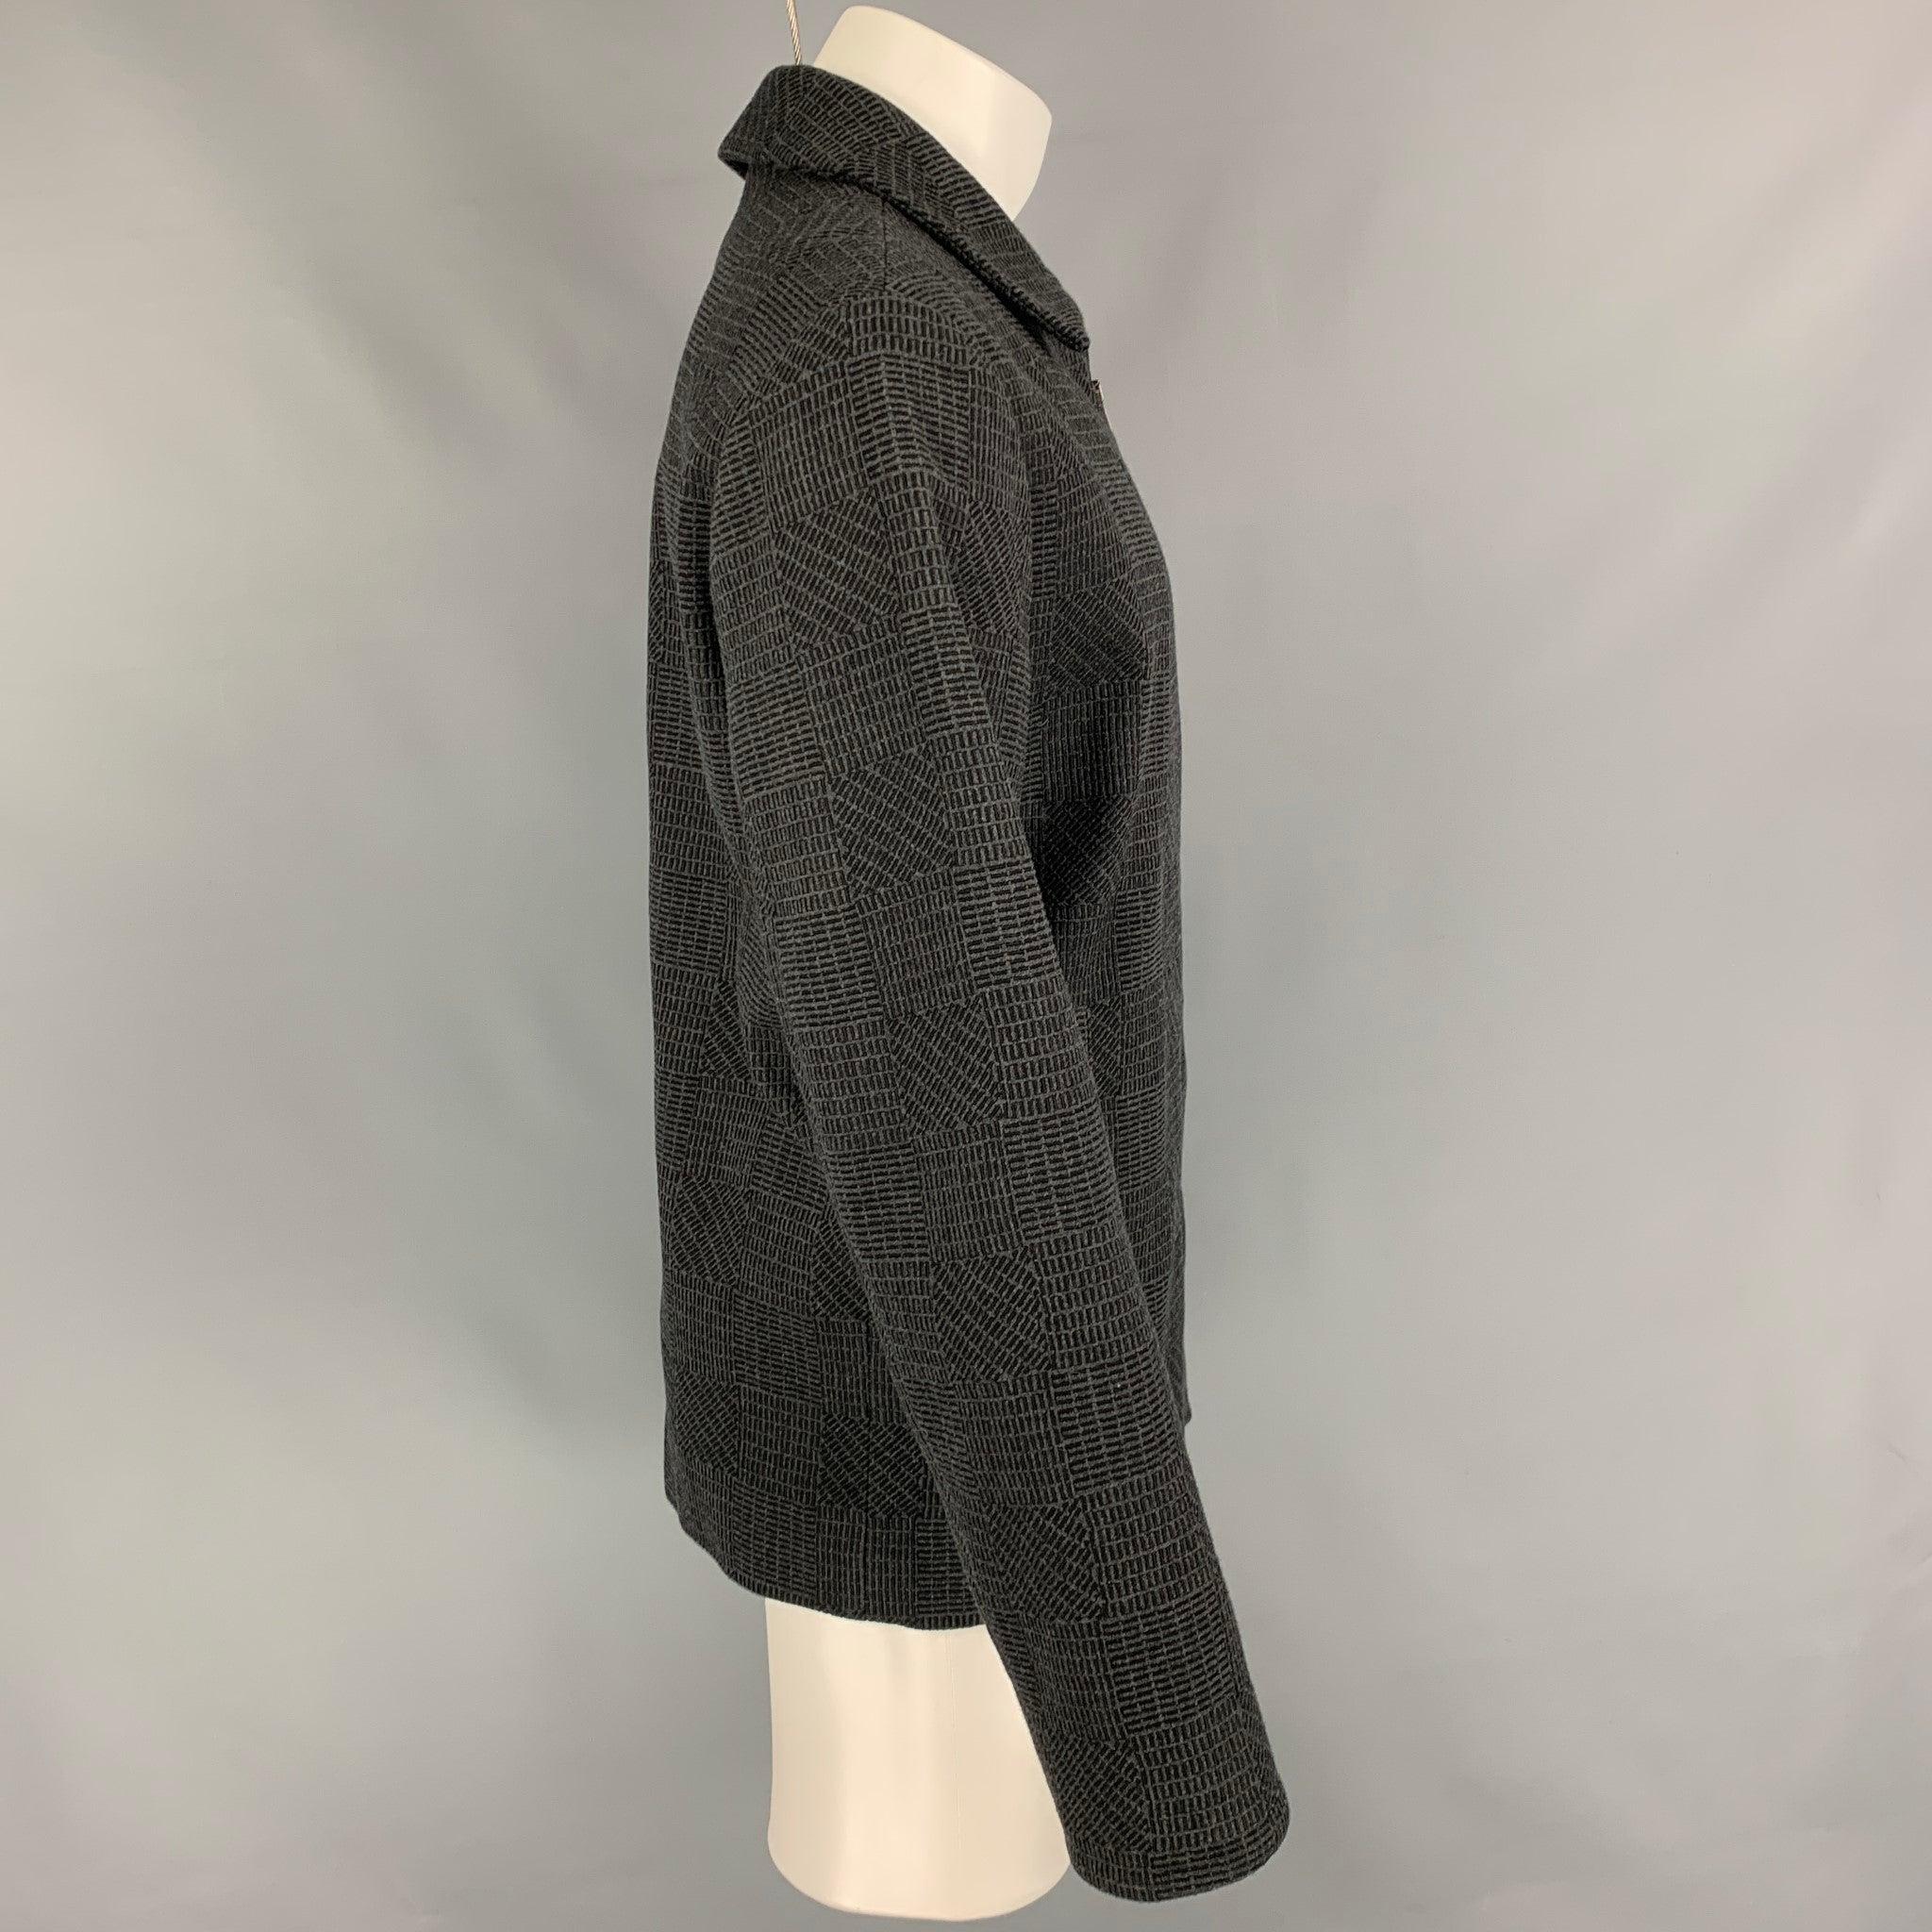 Men's CALVIN KLEIN COLLECTION Size 38 Charcoal Black Textured Wool / Cashmere Jacket